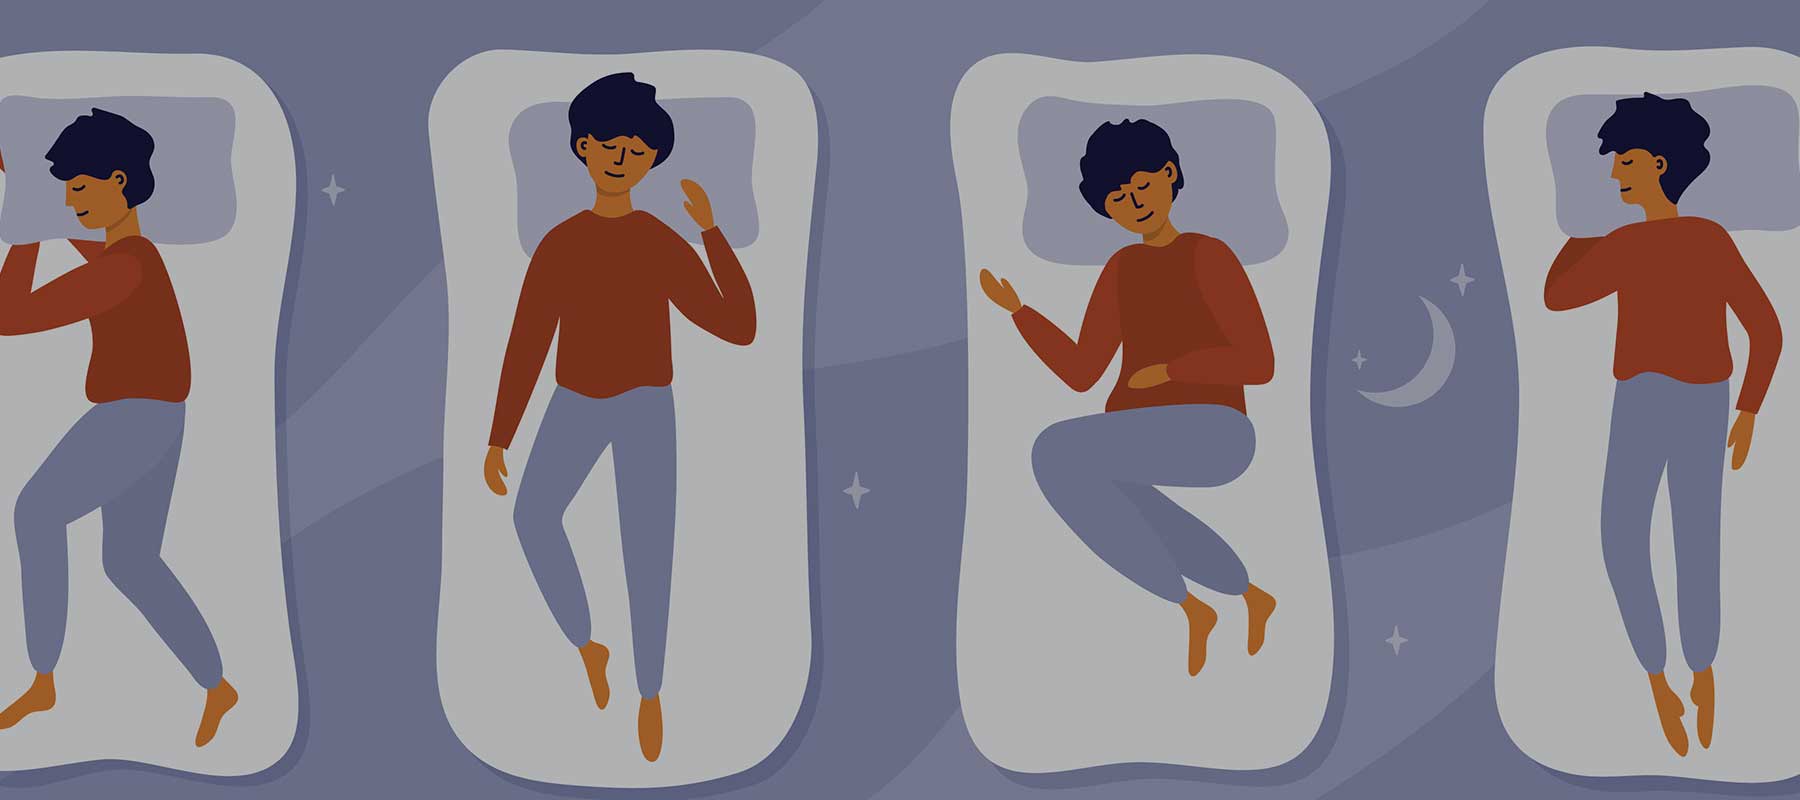 What Is The Most Popular Sleep Position